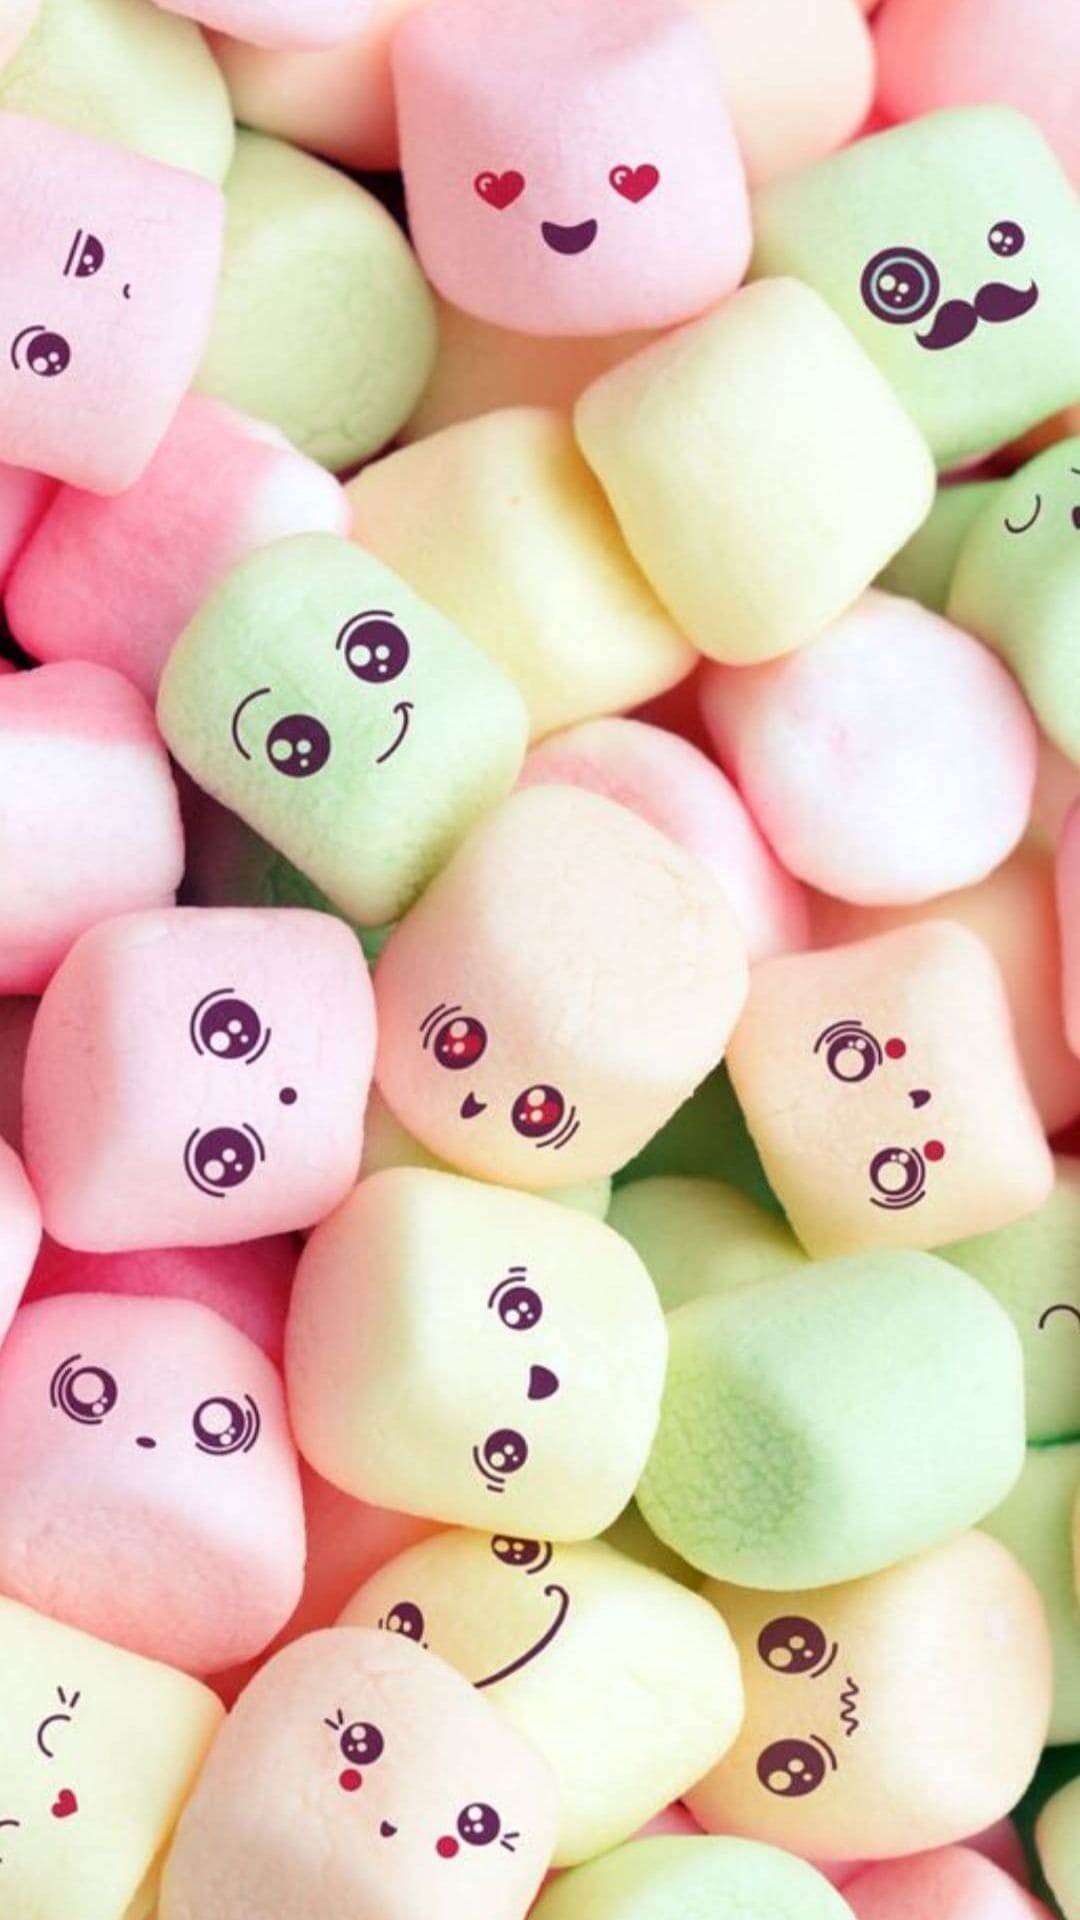 Girly: Sweet multicolored marshmallows, Smiling faces, Bright candy. 1080x1920 Full HD Background.